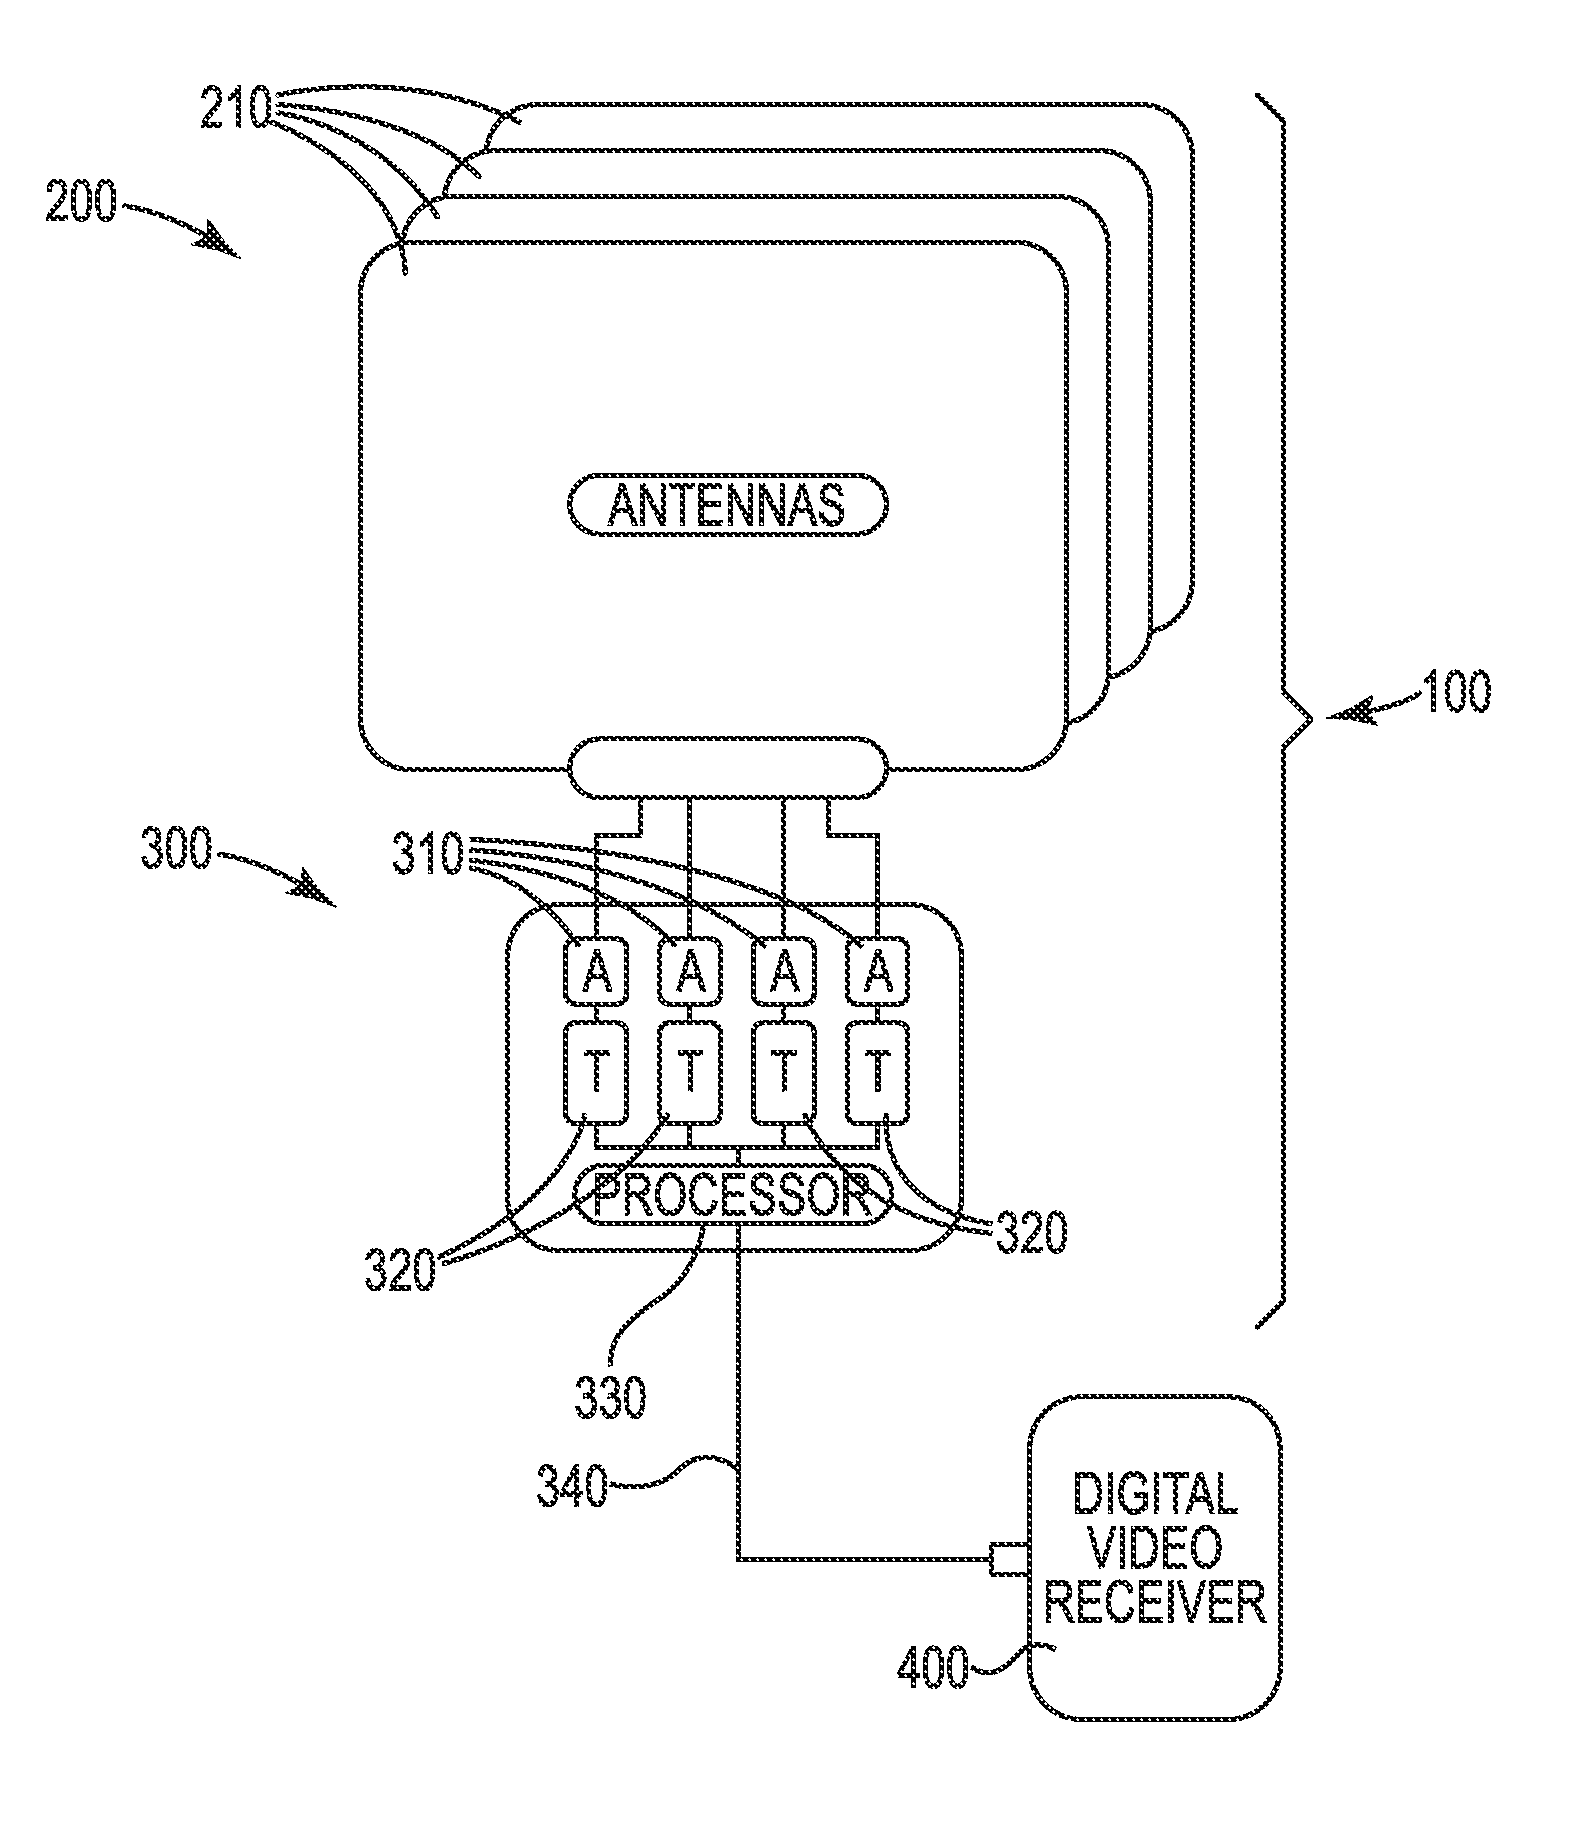 Antenna sub-system for receiving multiple digital broadcast television signals